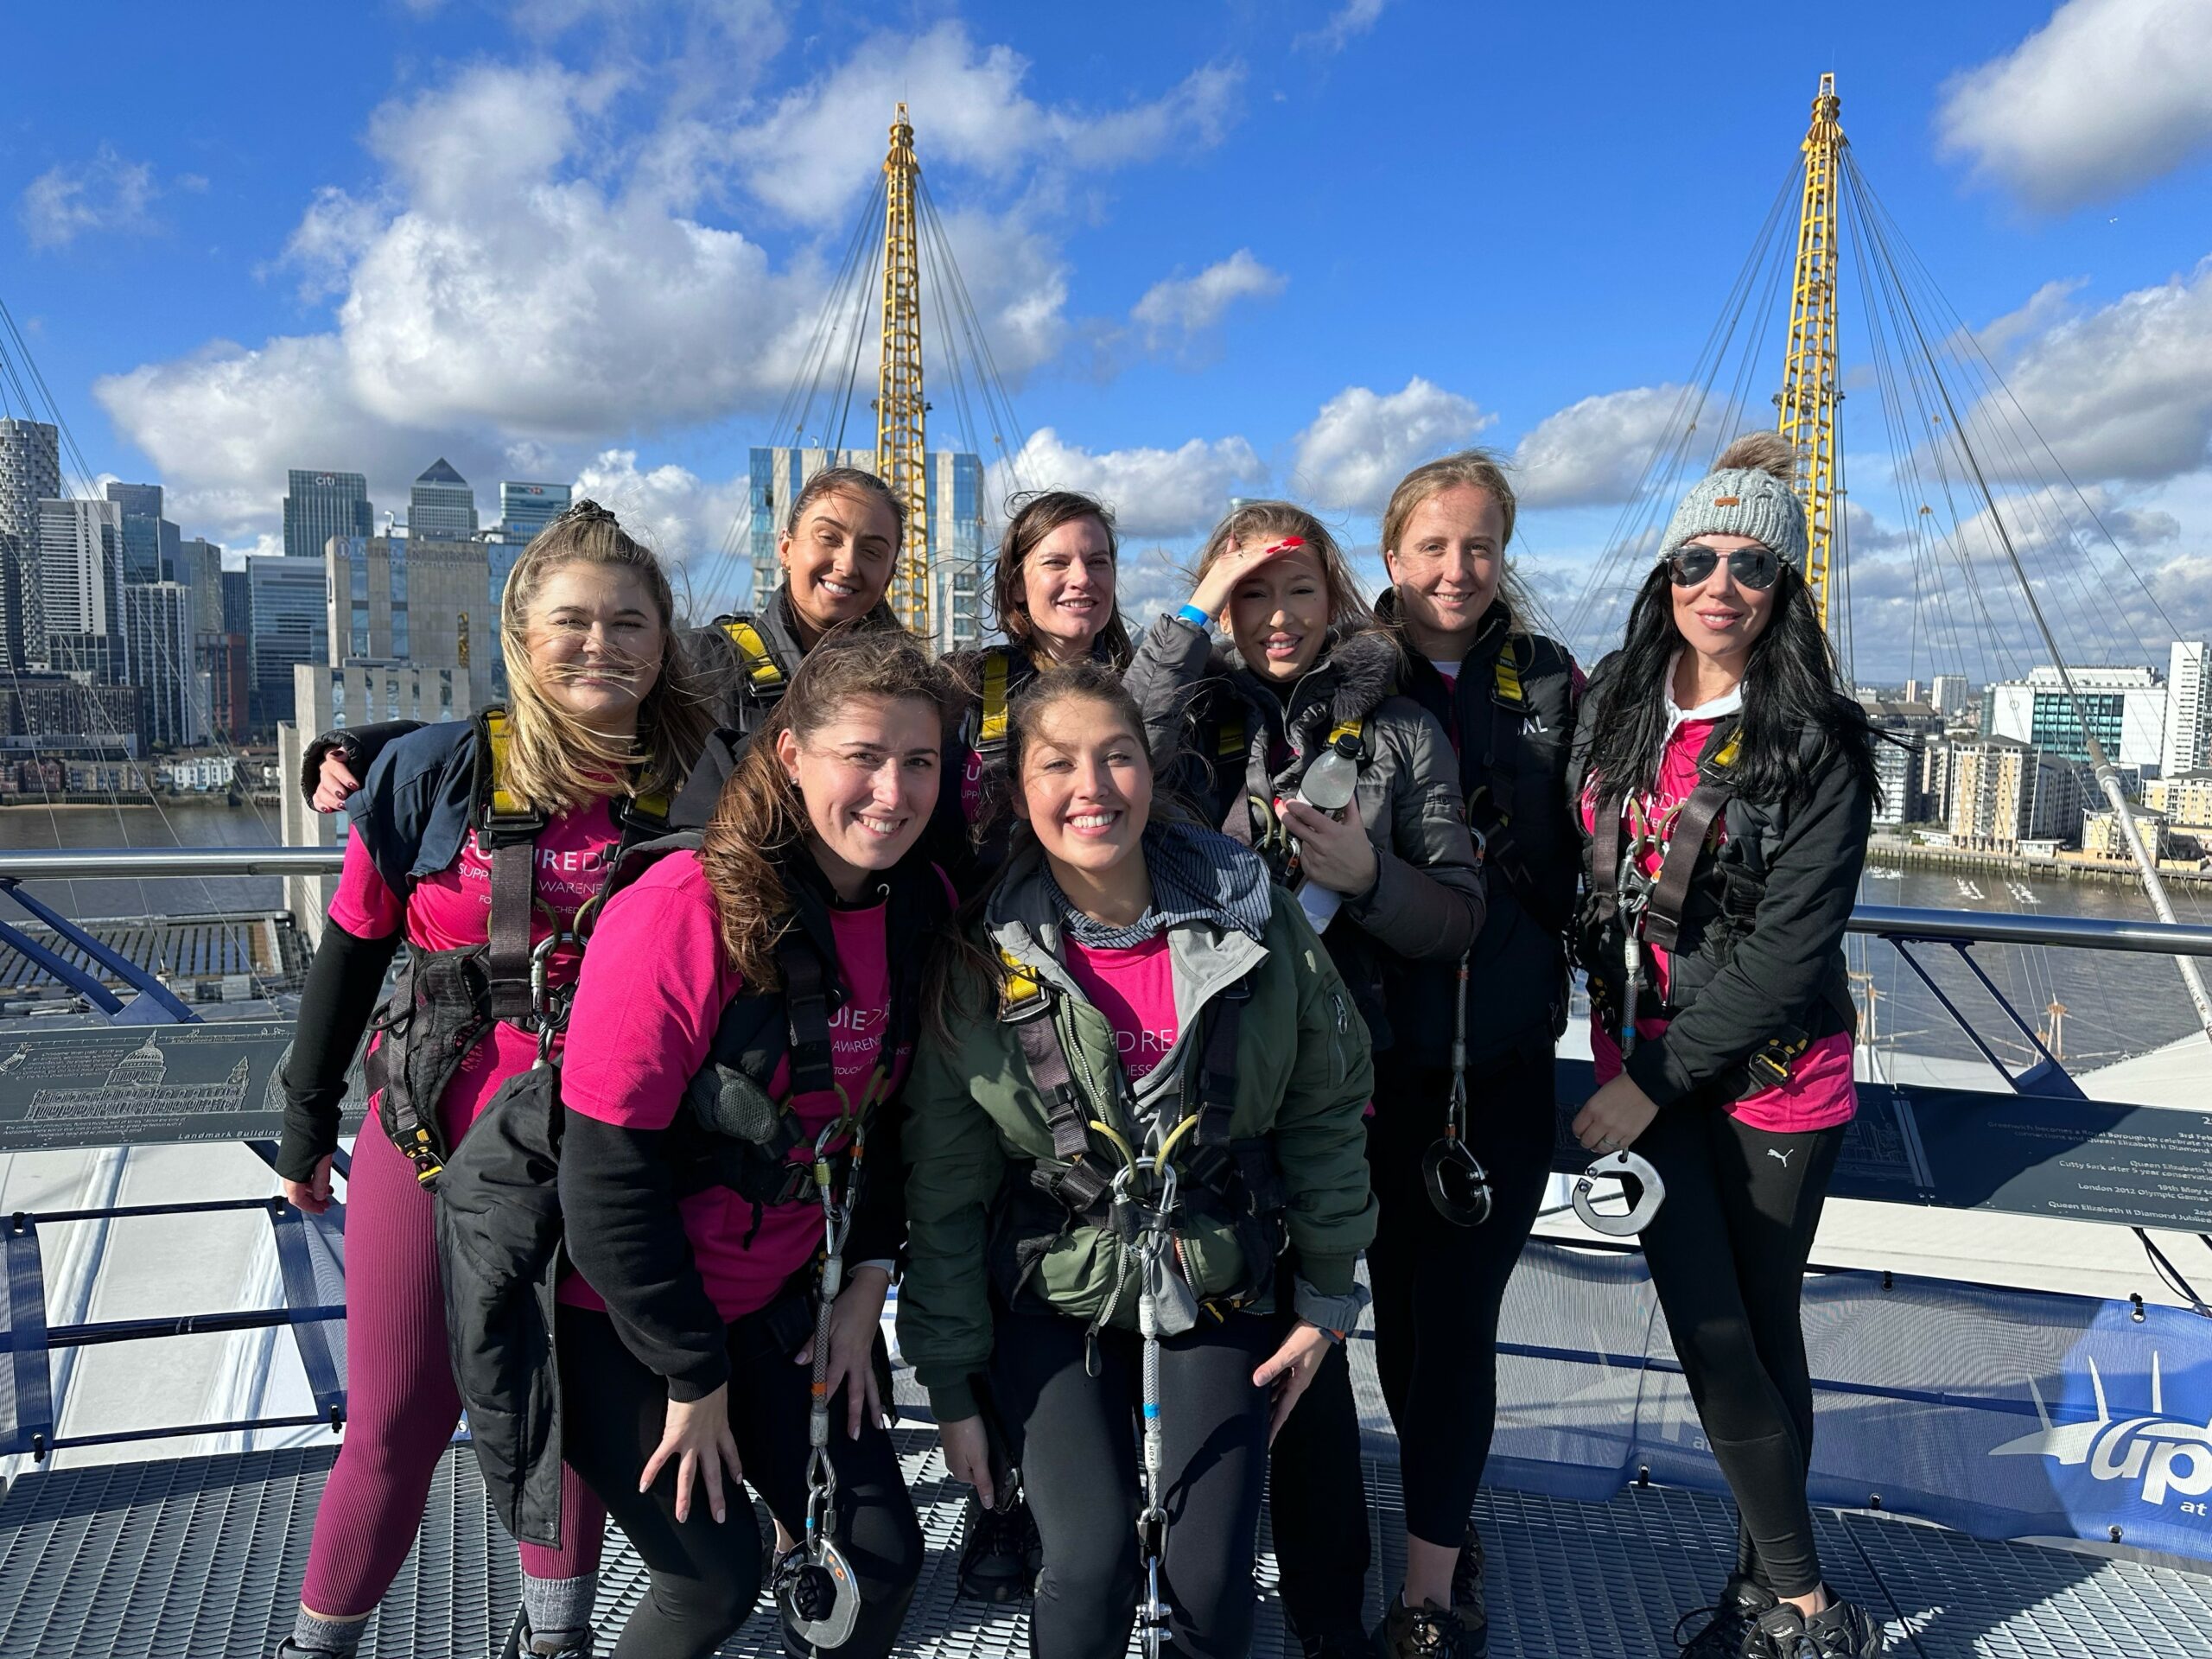 A group of women climbing the o2 to raise money for Future Dreams breast cancer charity